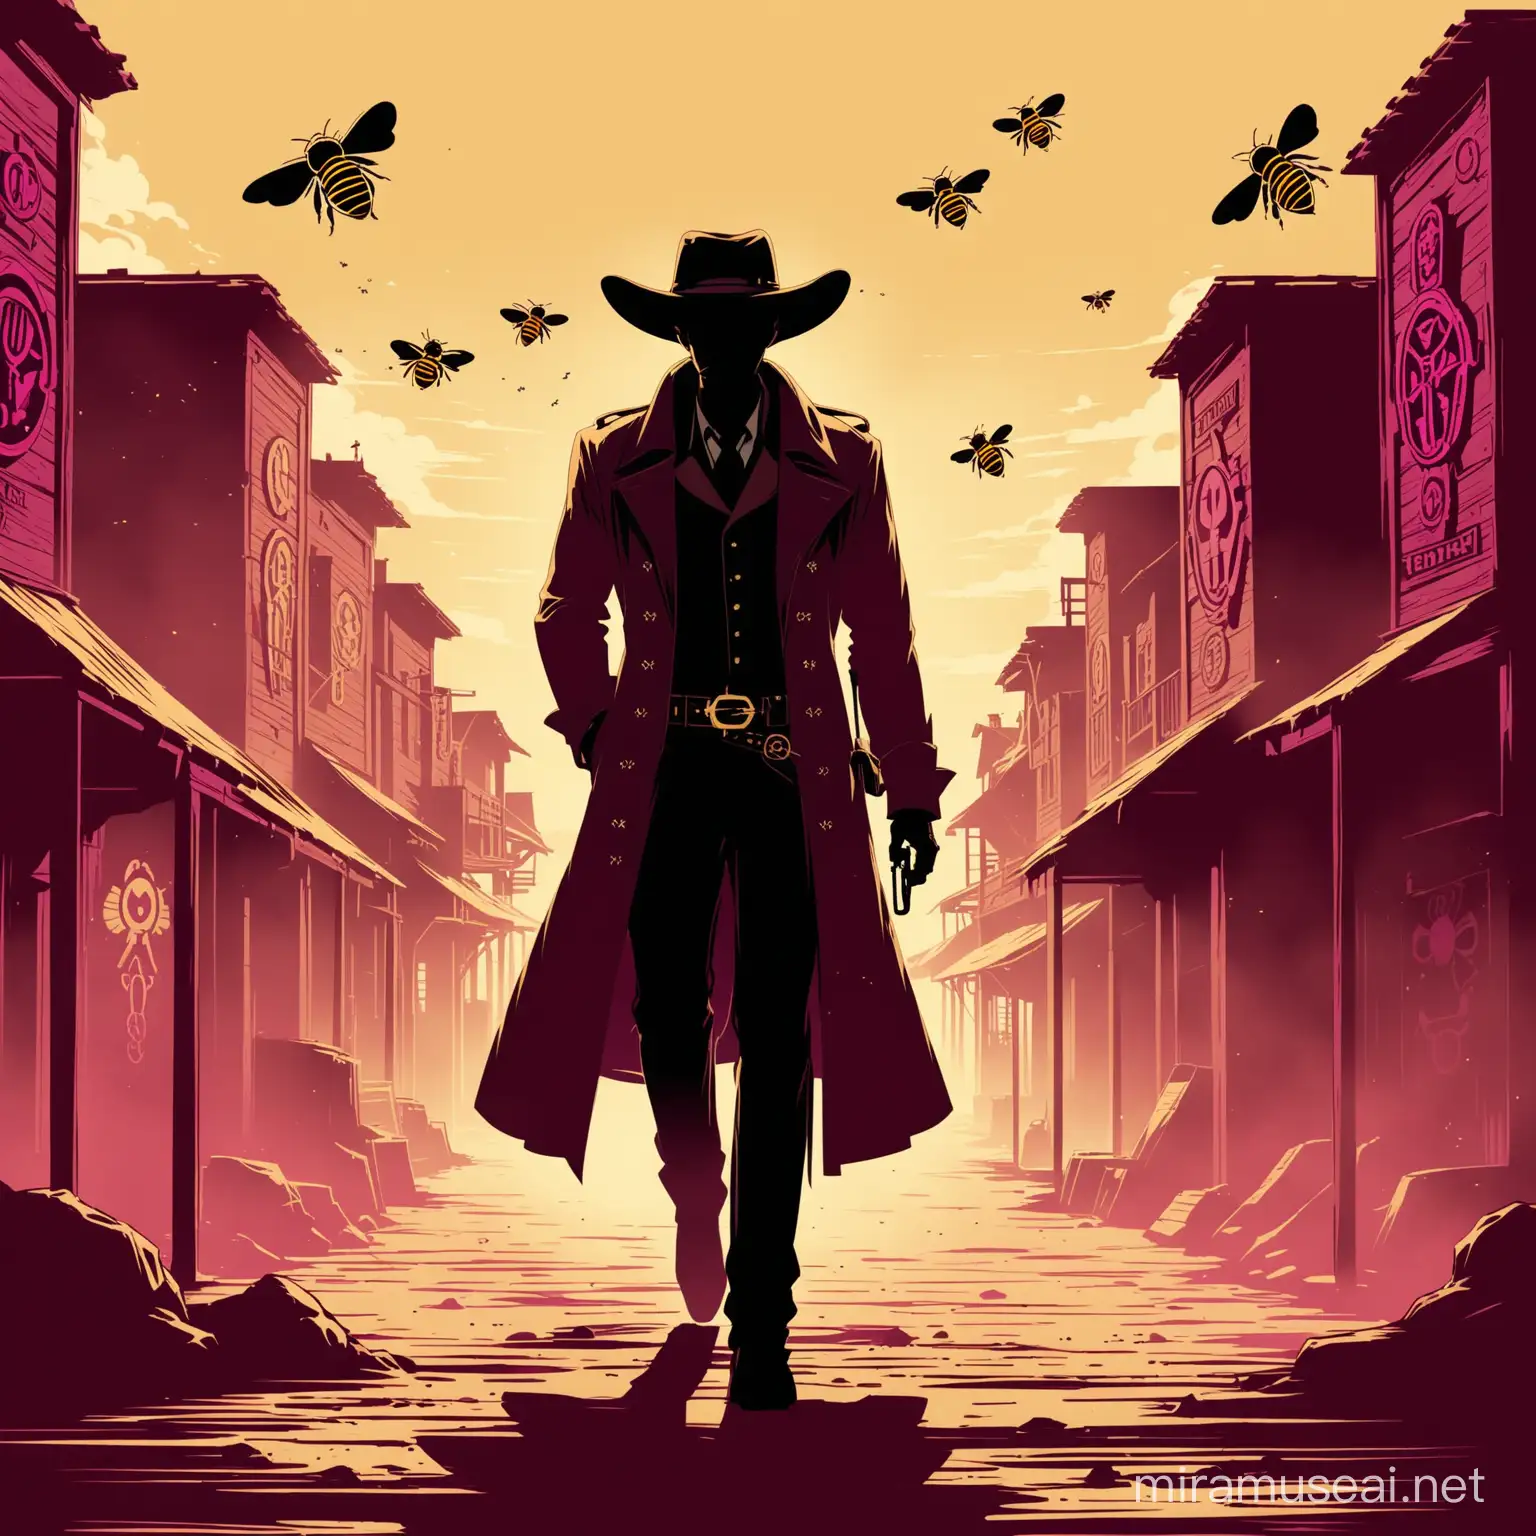 Outlaw Bee Silhouette in a Western Noir Town